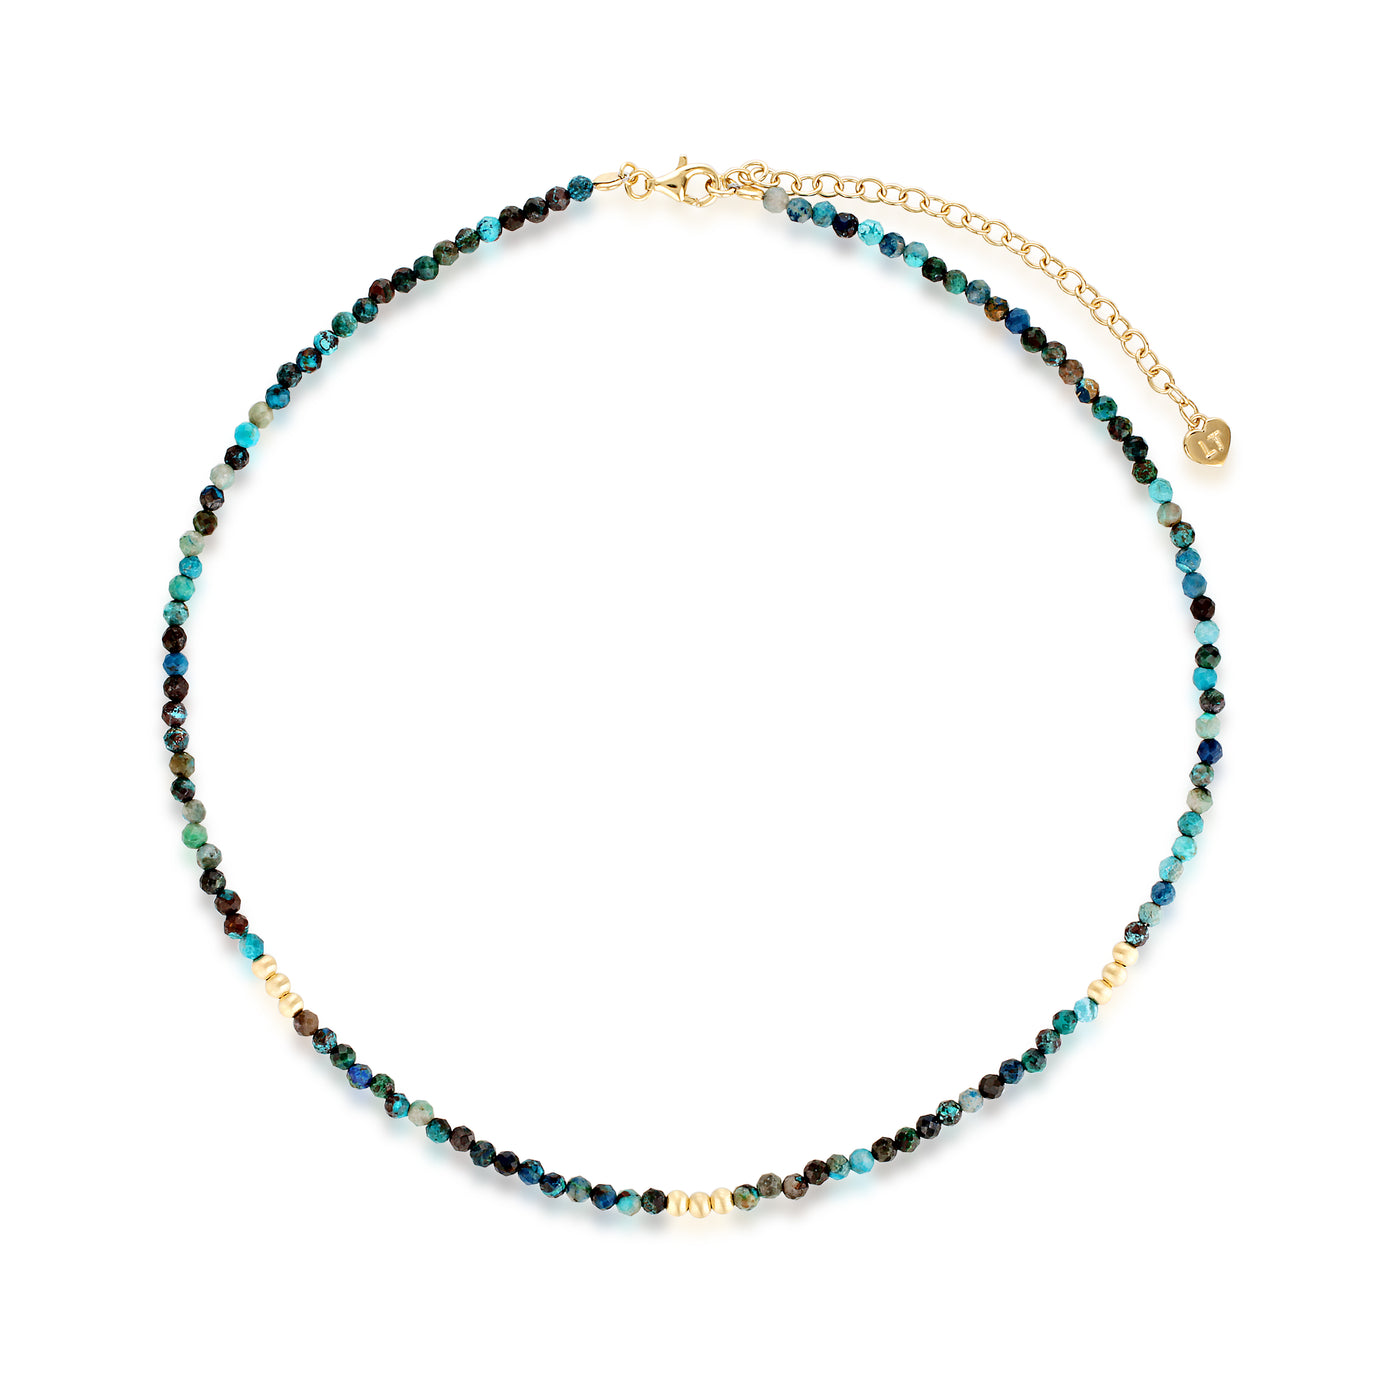 Mirage Necklace - Chrysocolla